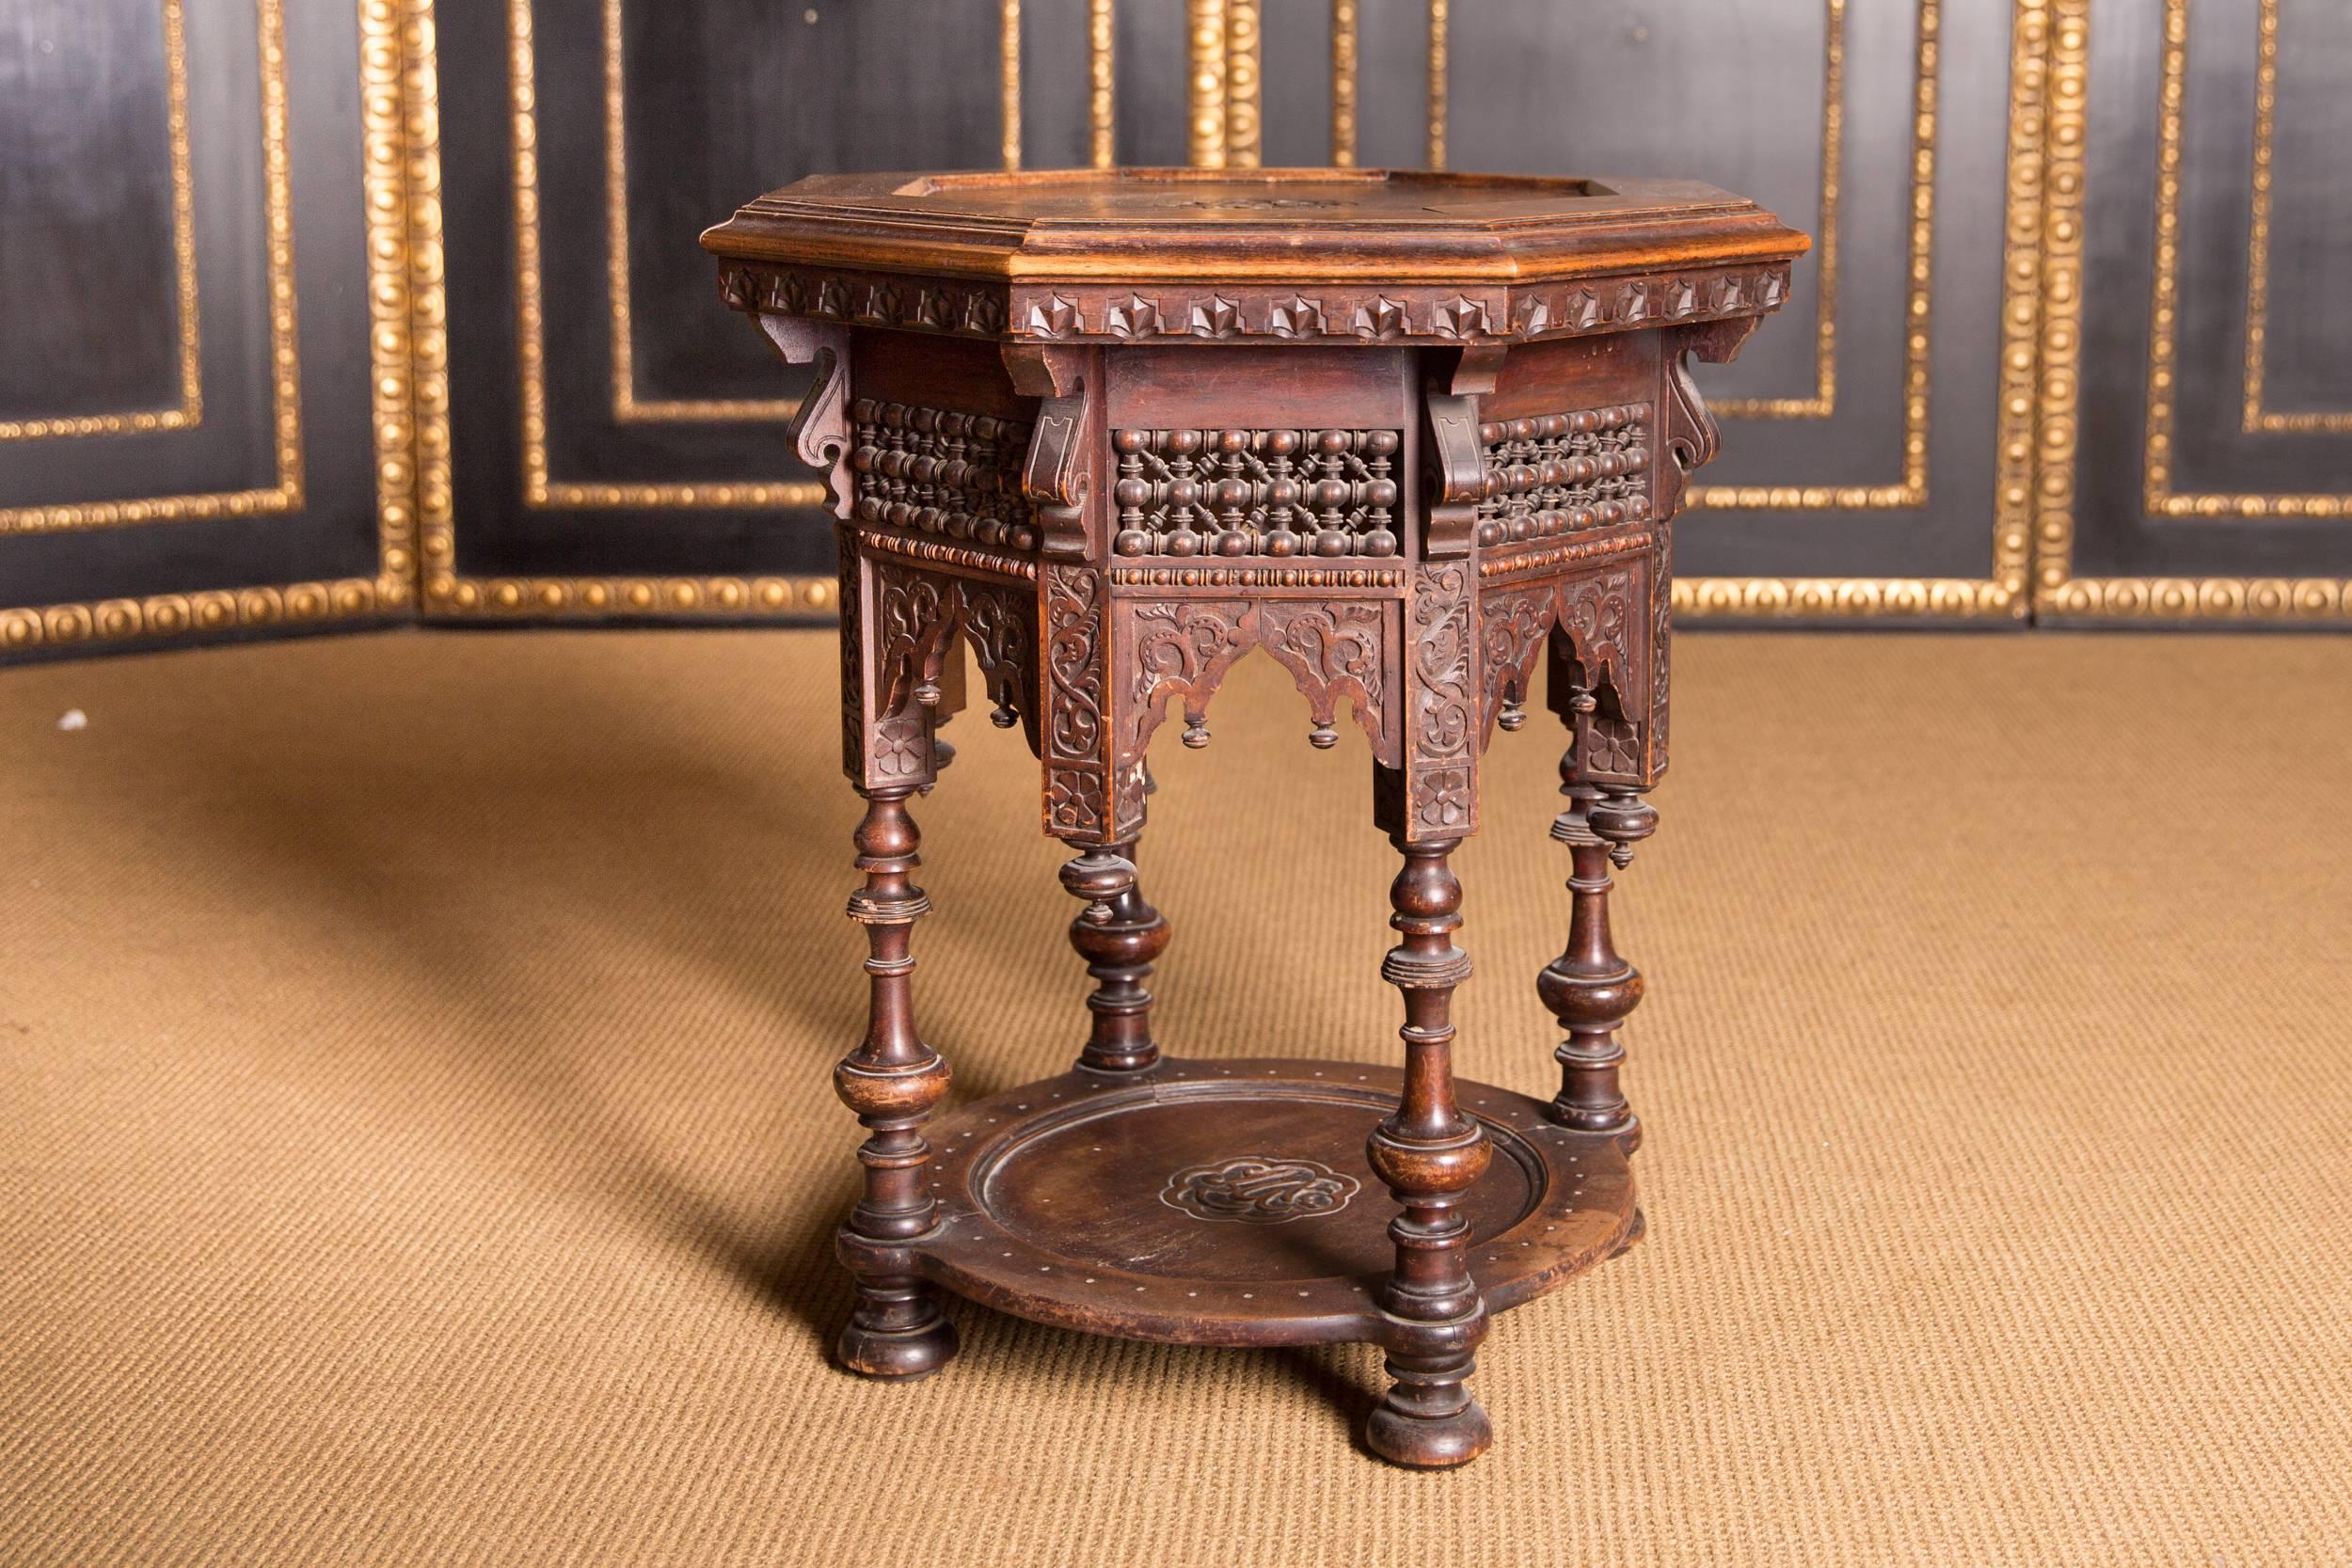 Solid wood with various inlays. Beautifully turned.

This type of furniture was very popular in Europe in the 19th century.